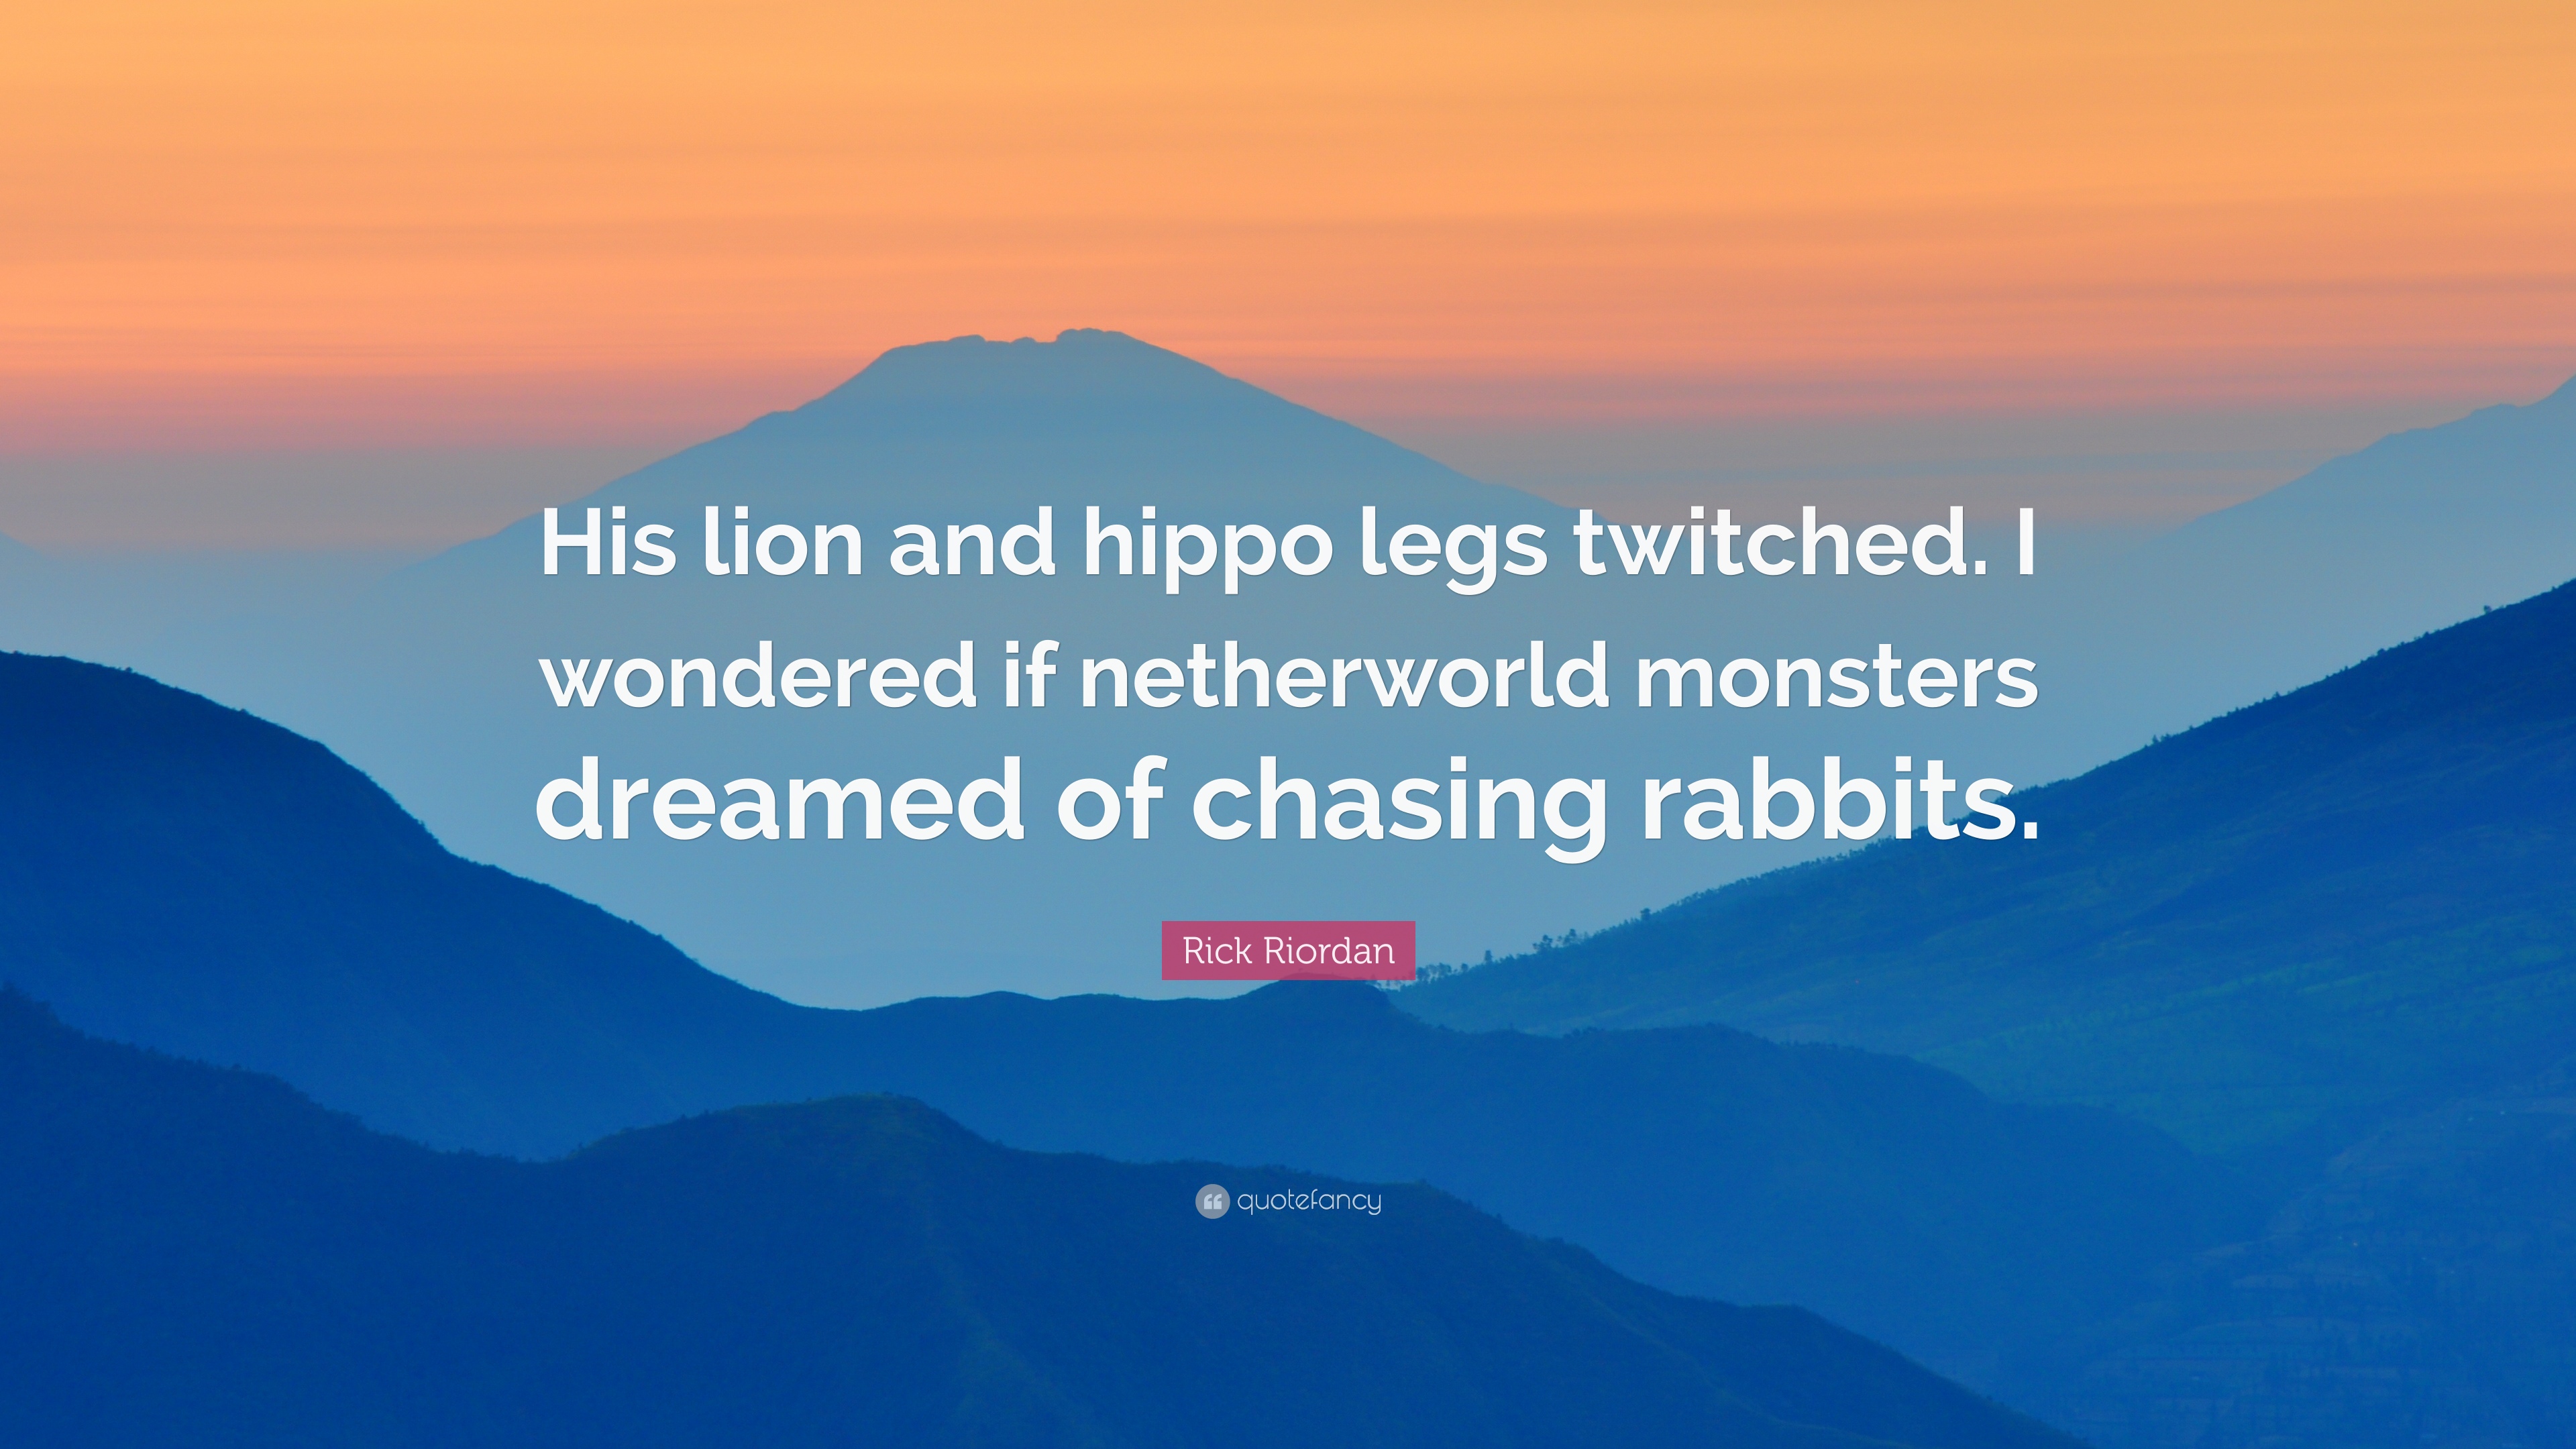 Rick Riordan Quote: “His lion and hippo legs twitched. I